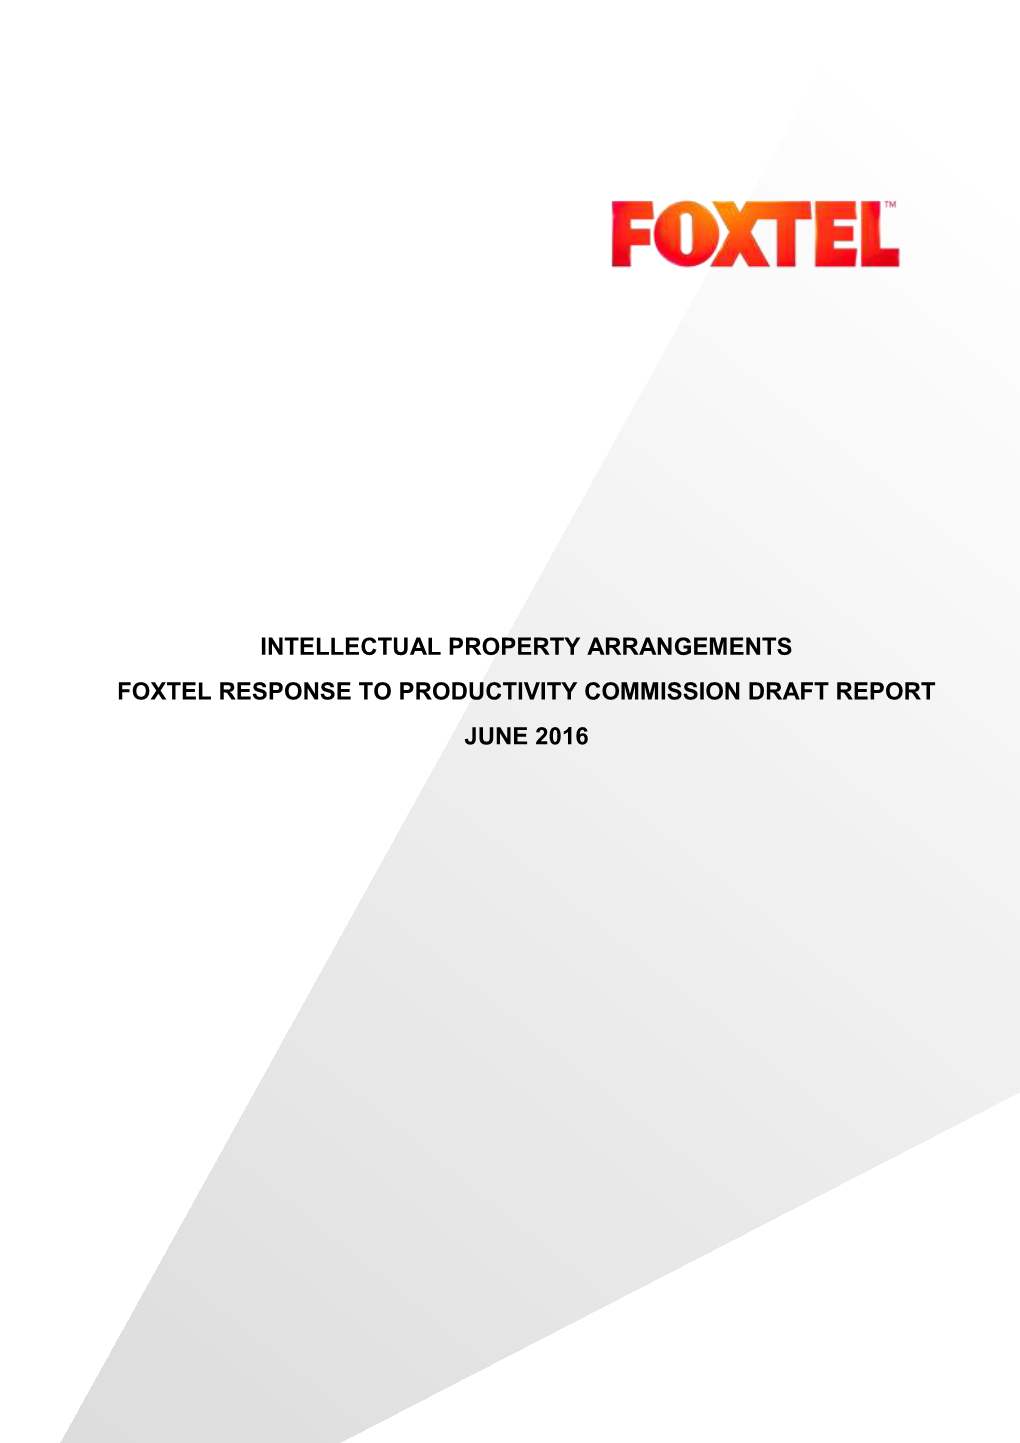 Foxtel Response to Productivity Commission Draft Report